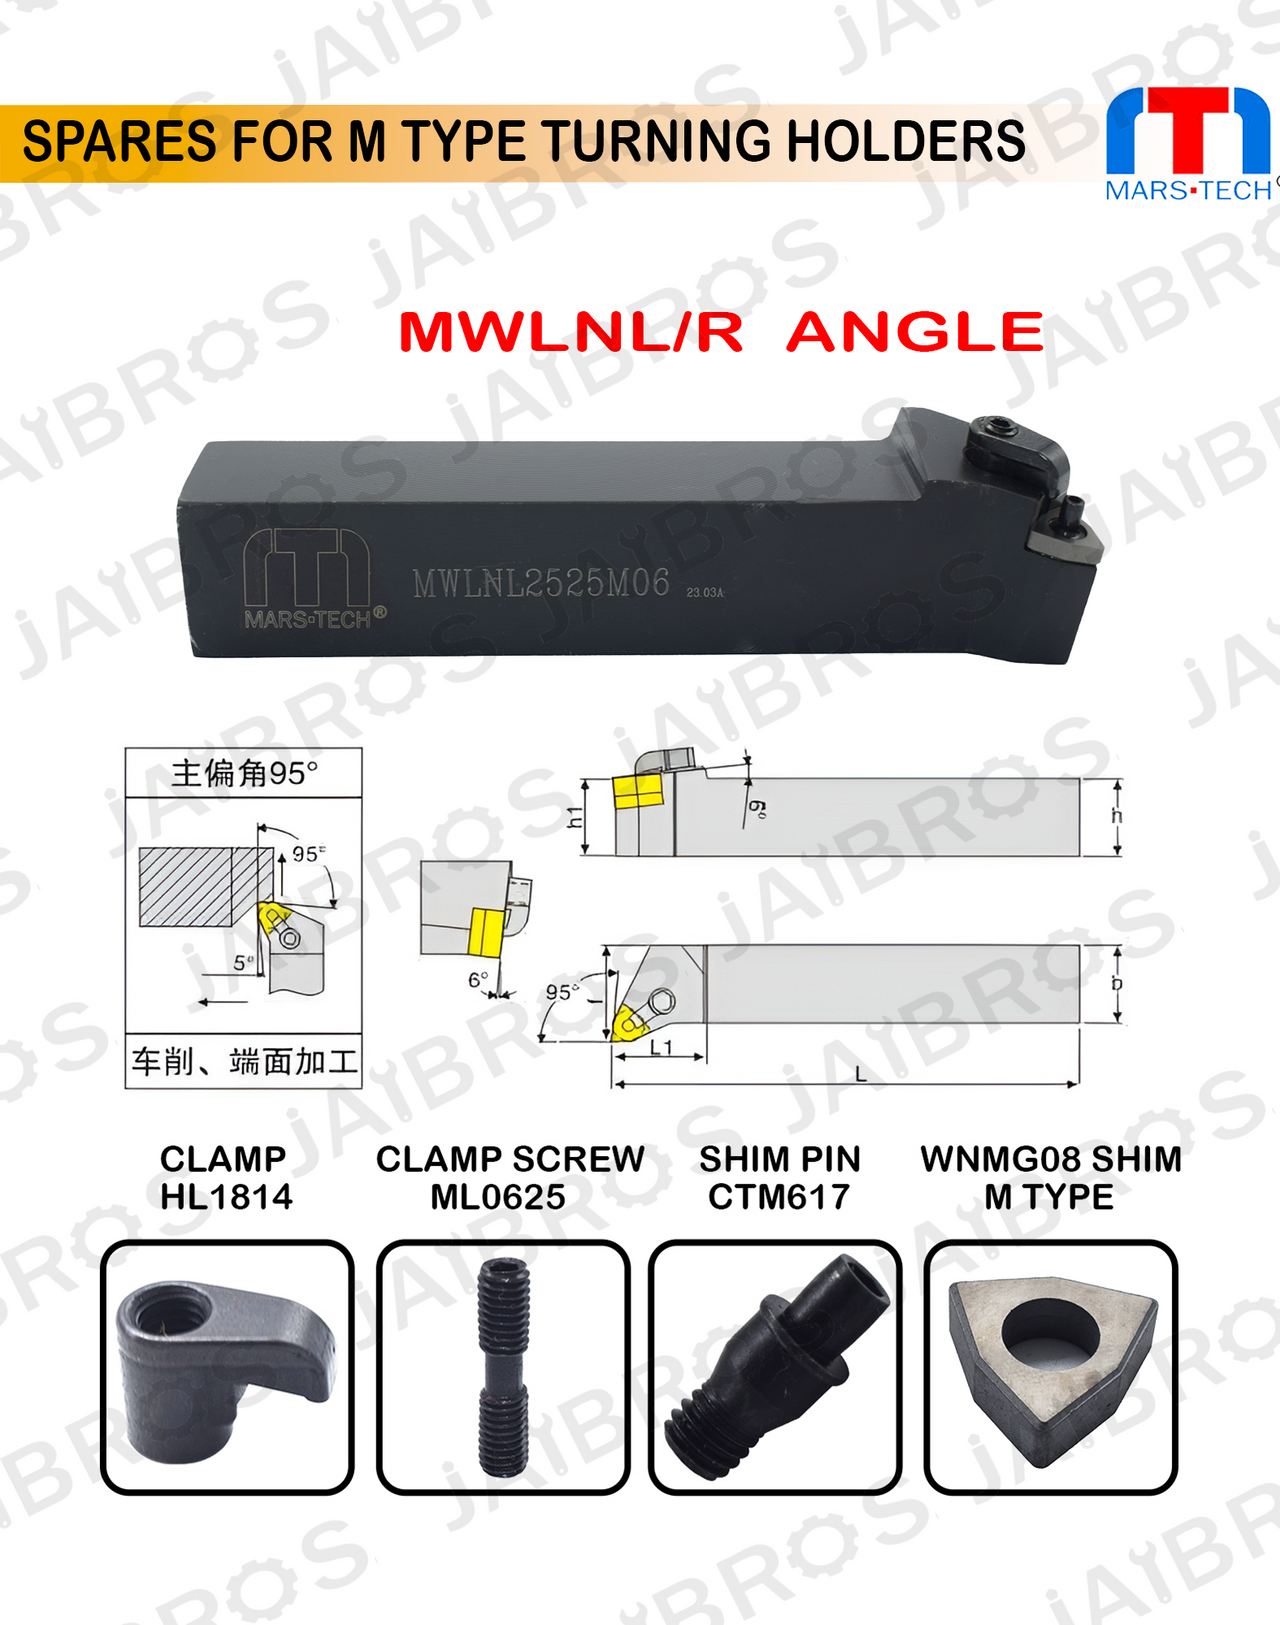 Turning Holder MWLNL/R 2525/2020 M08 Pack of 1